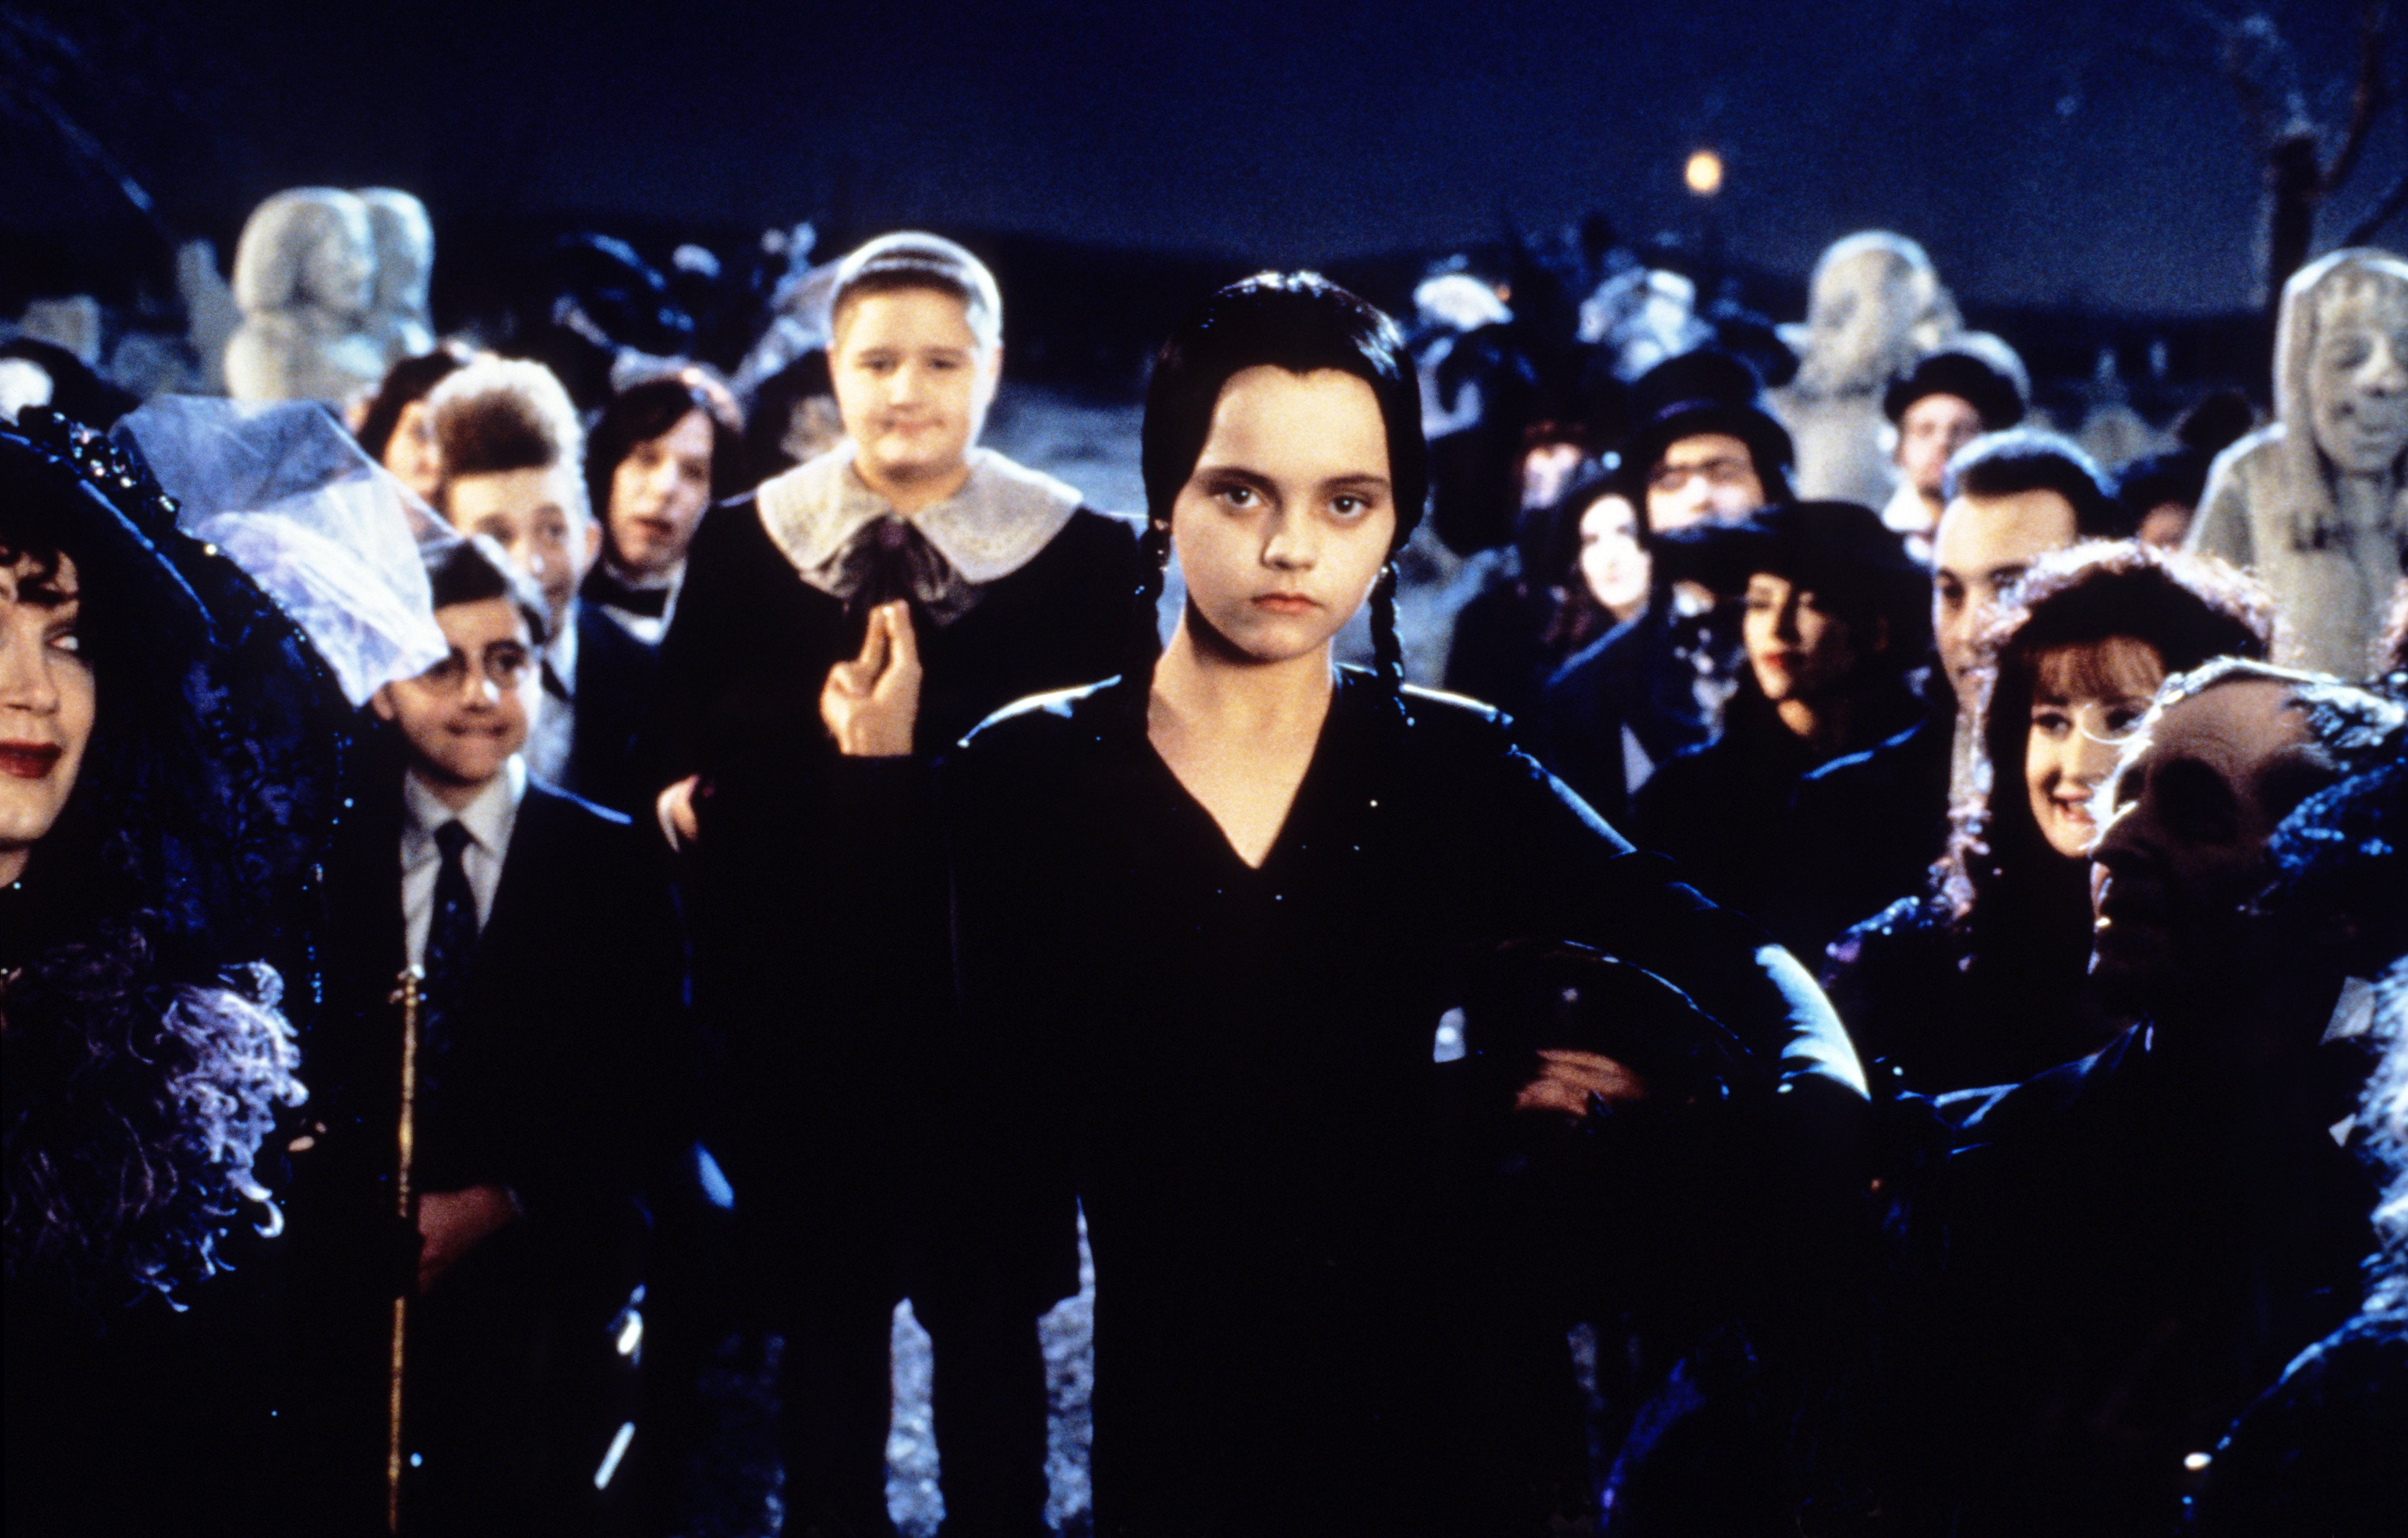 The Untold Truth Of Wednesday Addams